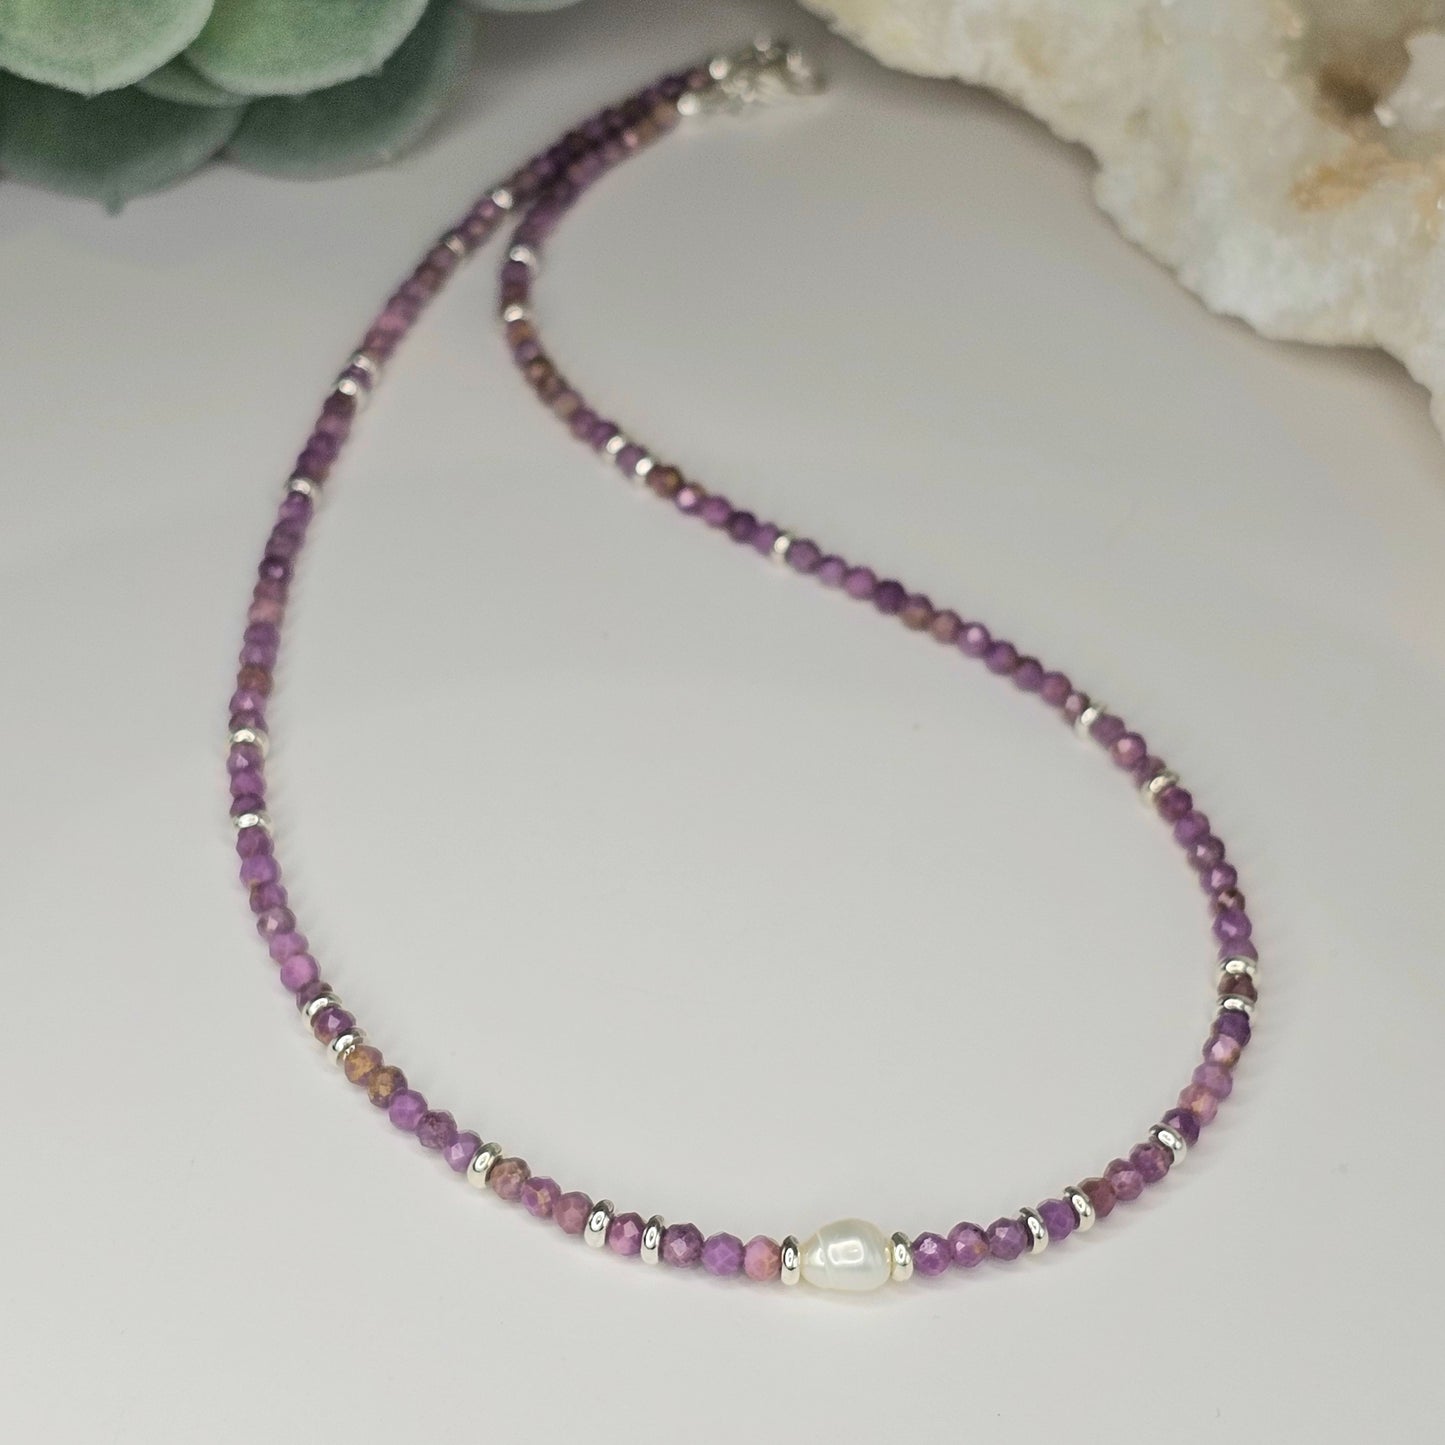 Delicate, faceted Lepidolite bead necklace with focal 8mm Freshwater Pearl and silver toned stainless steel clasp.